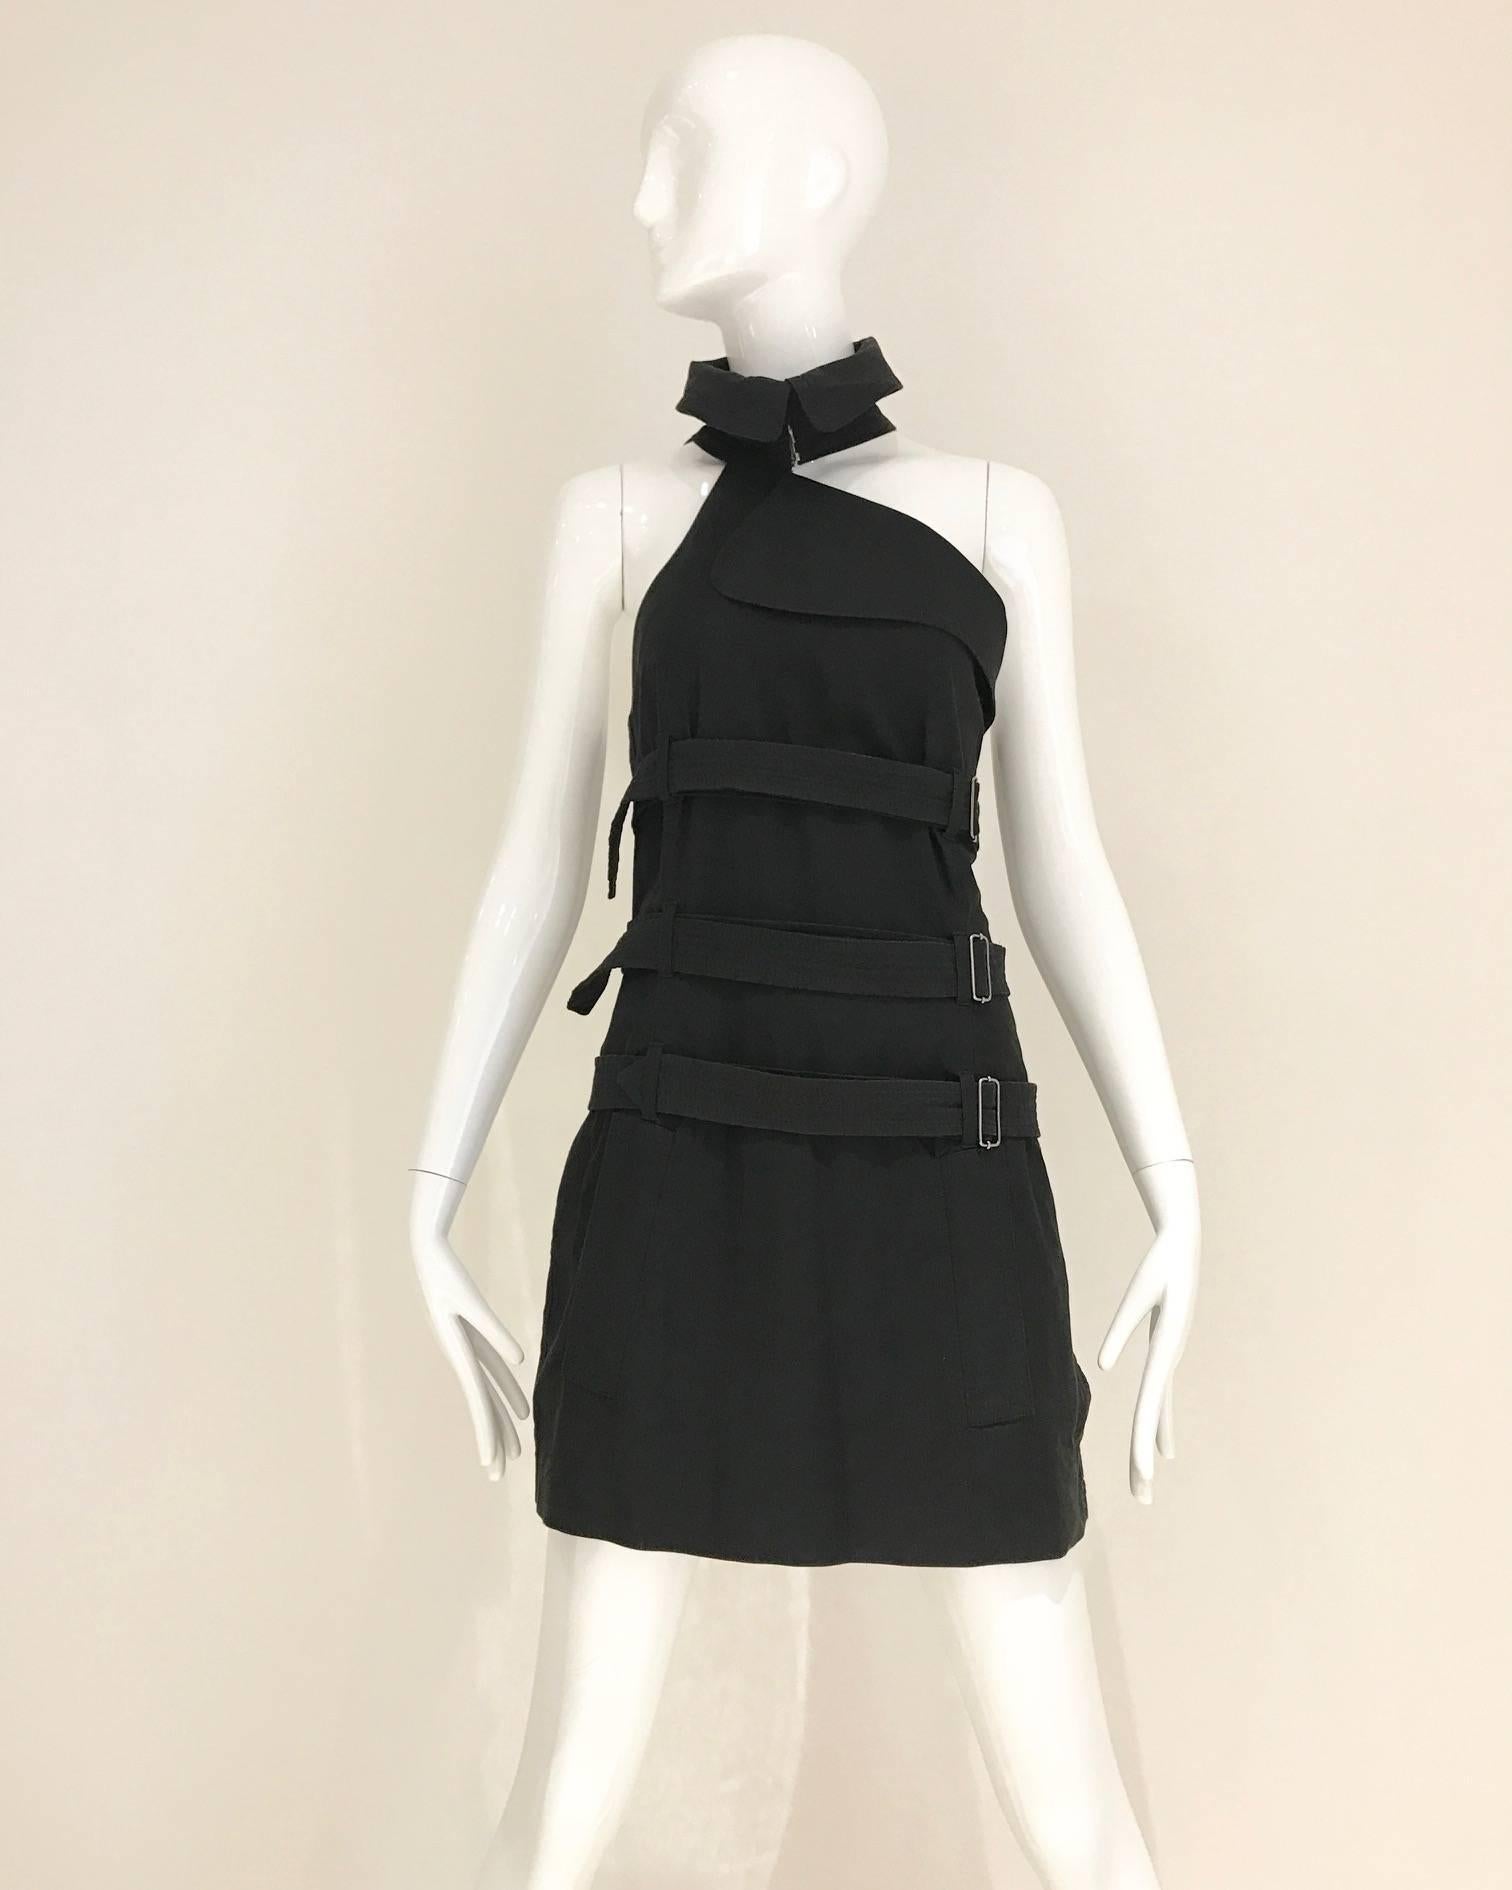 Sexy Vintage  Jean Paul Gaultier black cotton halter top/ or mini dress with straps 
(bondage style). 3 Belts wrap around and its adjustable. buttons on the side.
 Fit size: 6 MEDIUM
Bust: 36 inches/ Waist 33 inches/ Hip 36 inches/ Length: 32 inches